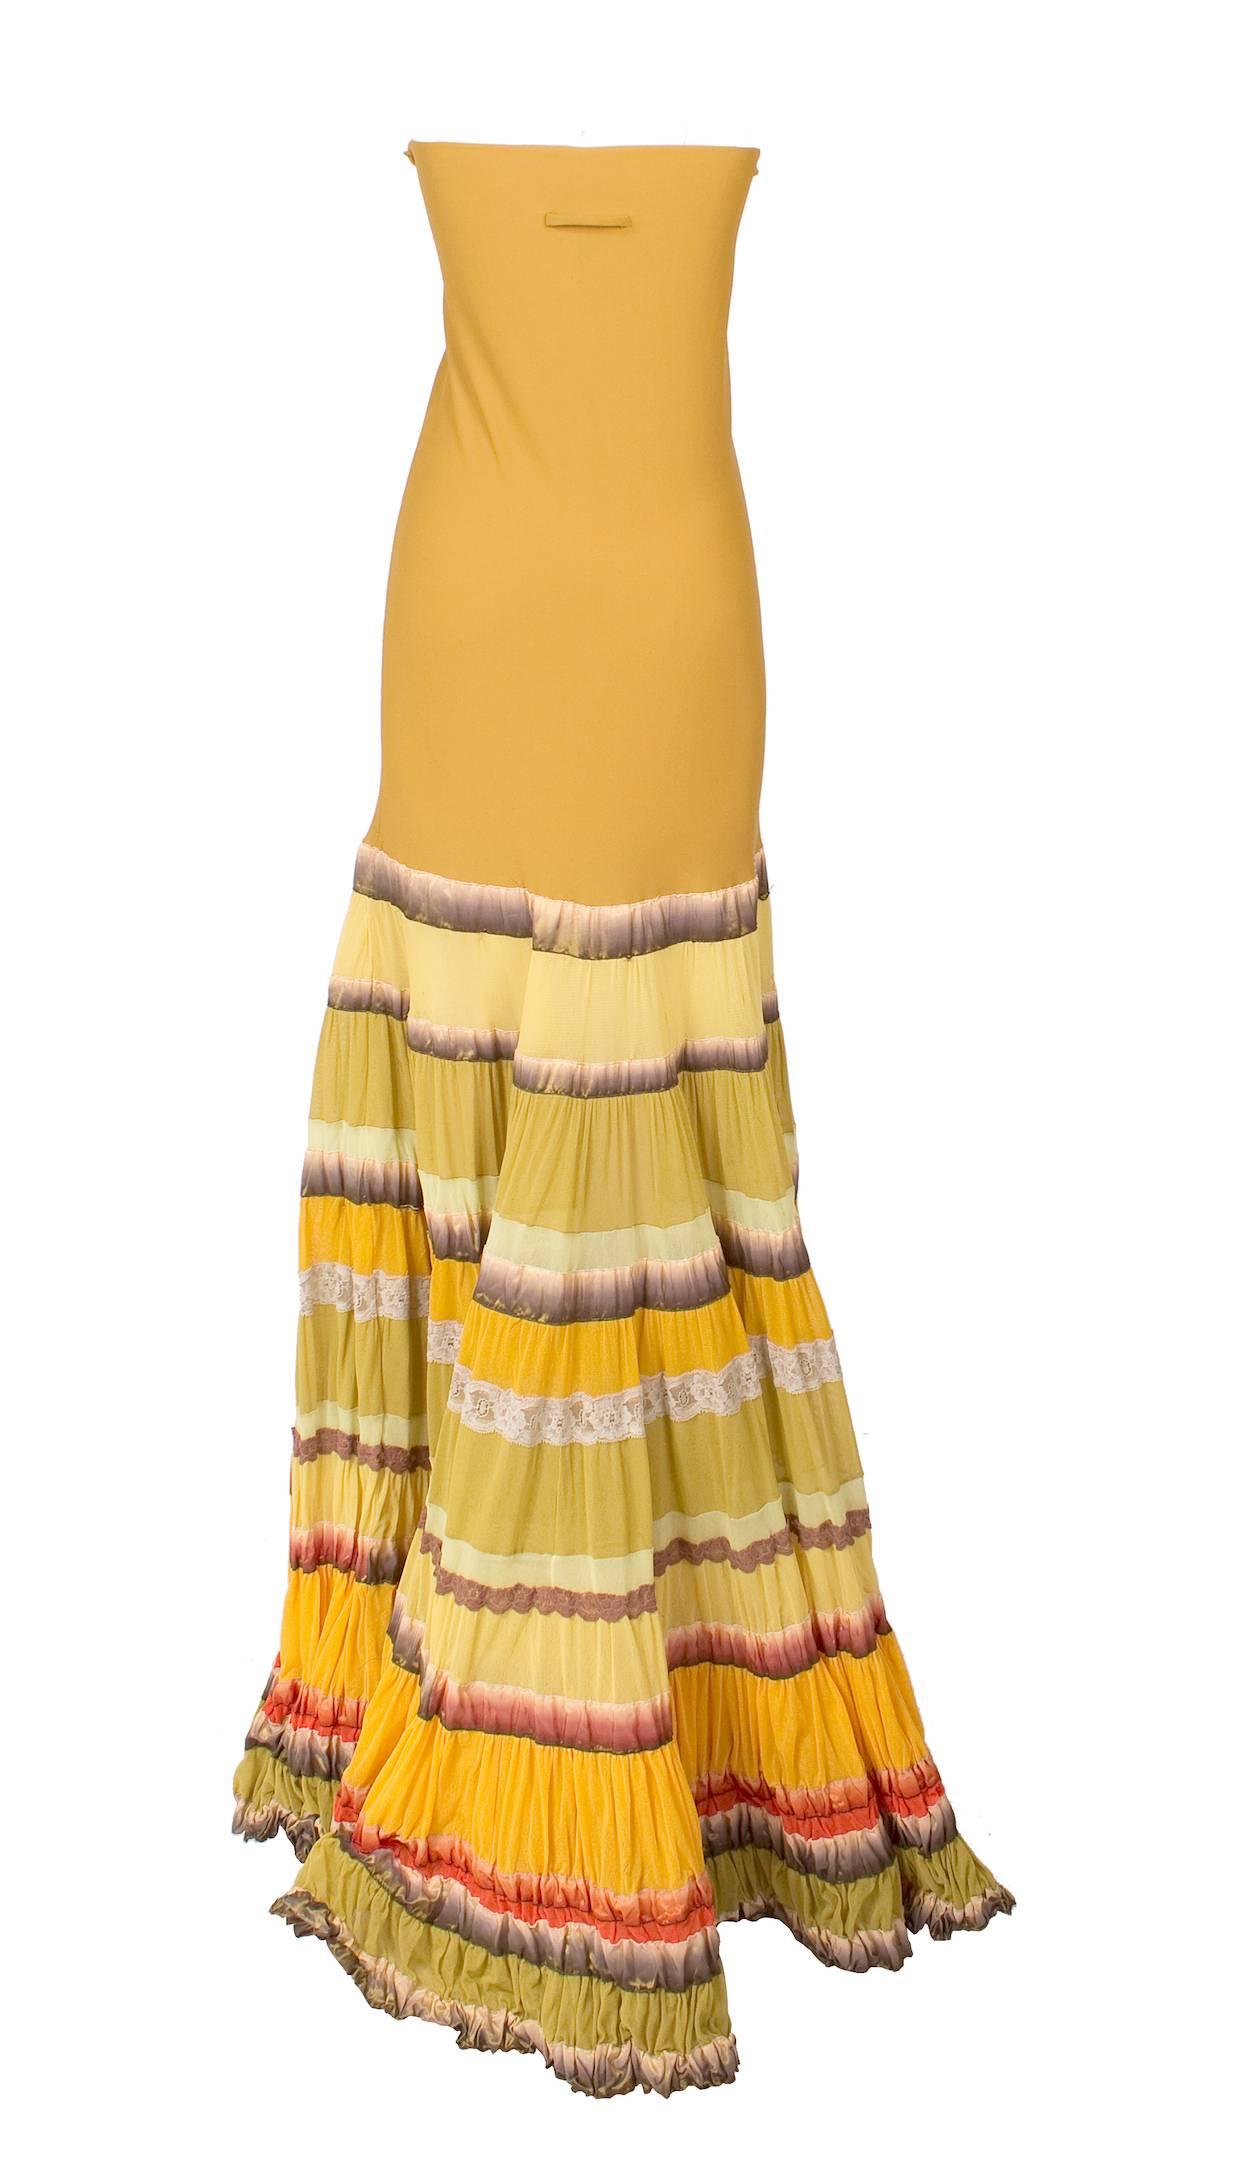 This is a tube top dress by Jean Paul Gaultier from Spring 2005.  The body is a mustard yellow stretch material and the skirt has rows of ruffles and pleats.  